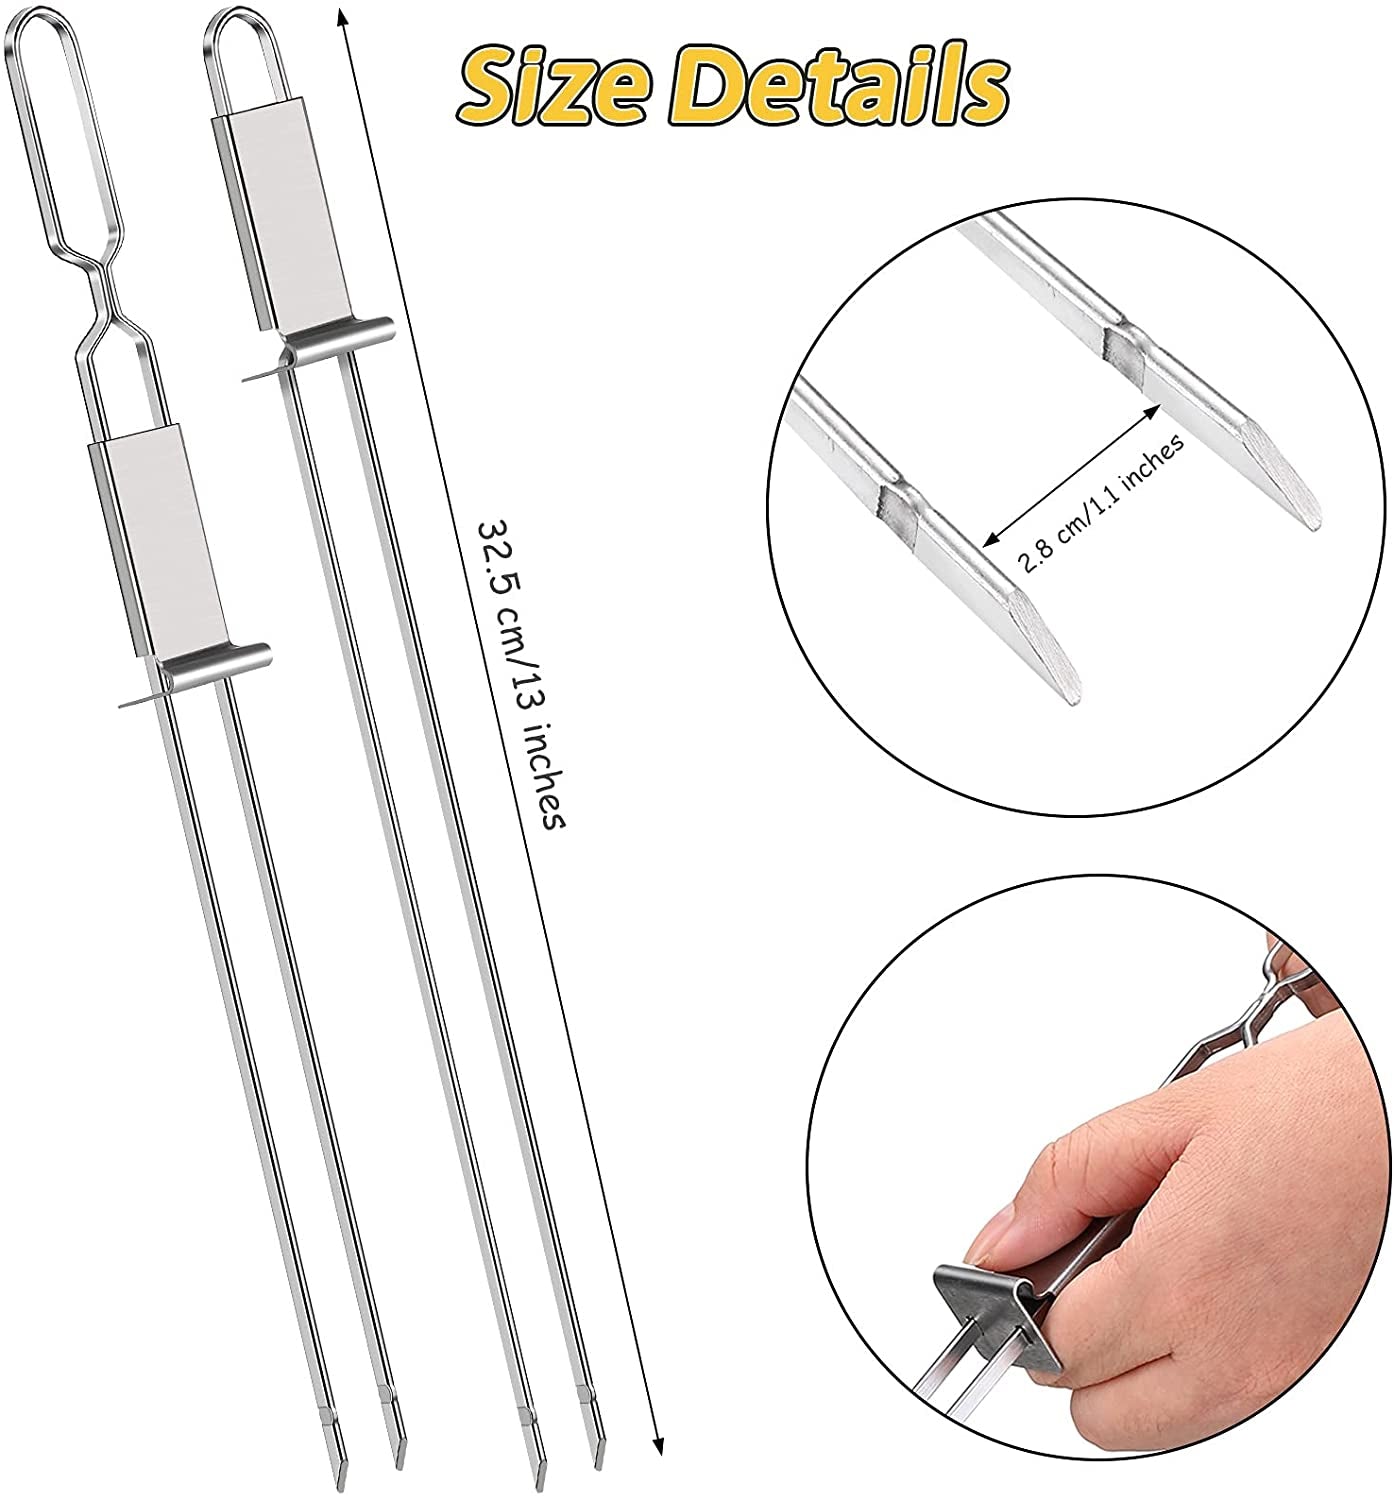 Lallisa, Lallisa Kabob Skewer for Grilling, Metal Stainless Steel BBQ Skewer Stick with Push Bar, Reusable Double Pronged Kebab Skewer Tool Quick Release Meat, Chicken, Vegetable and Fruit (9 Pieces)